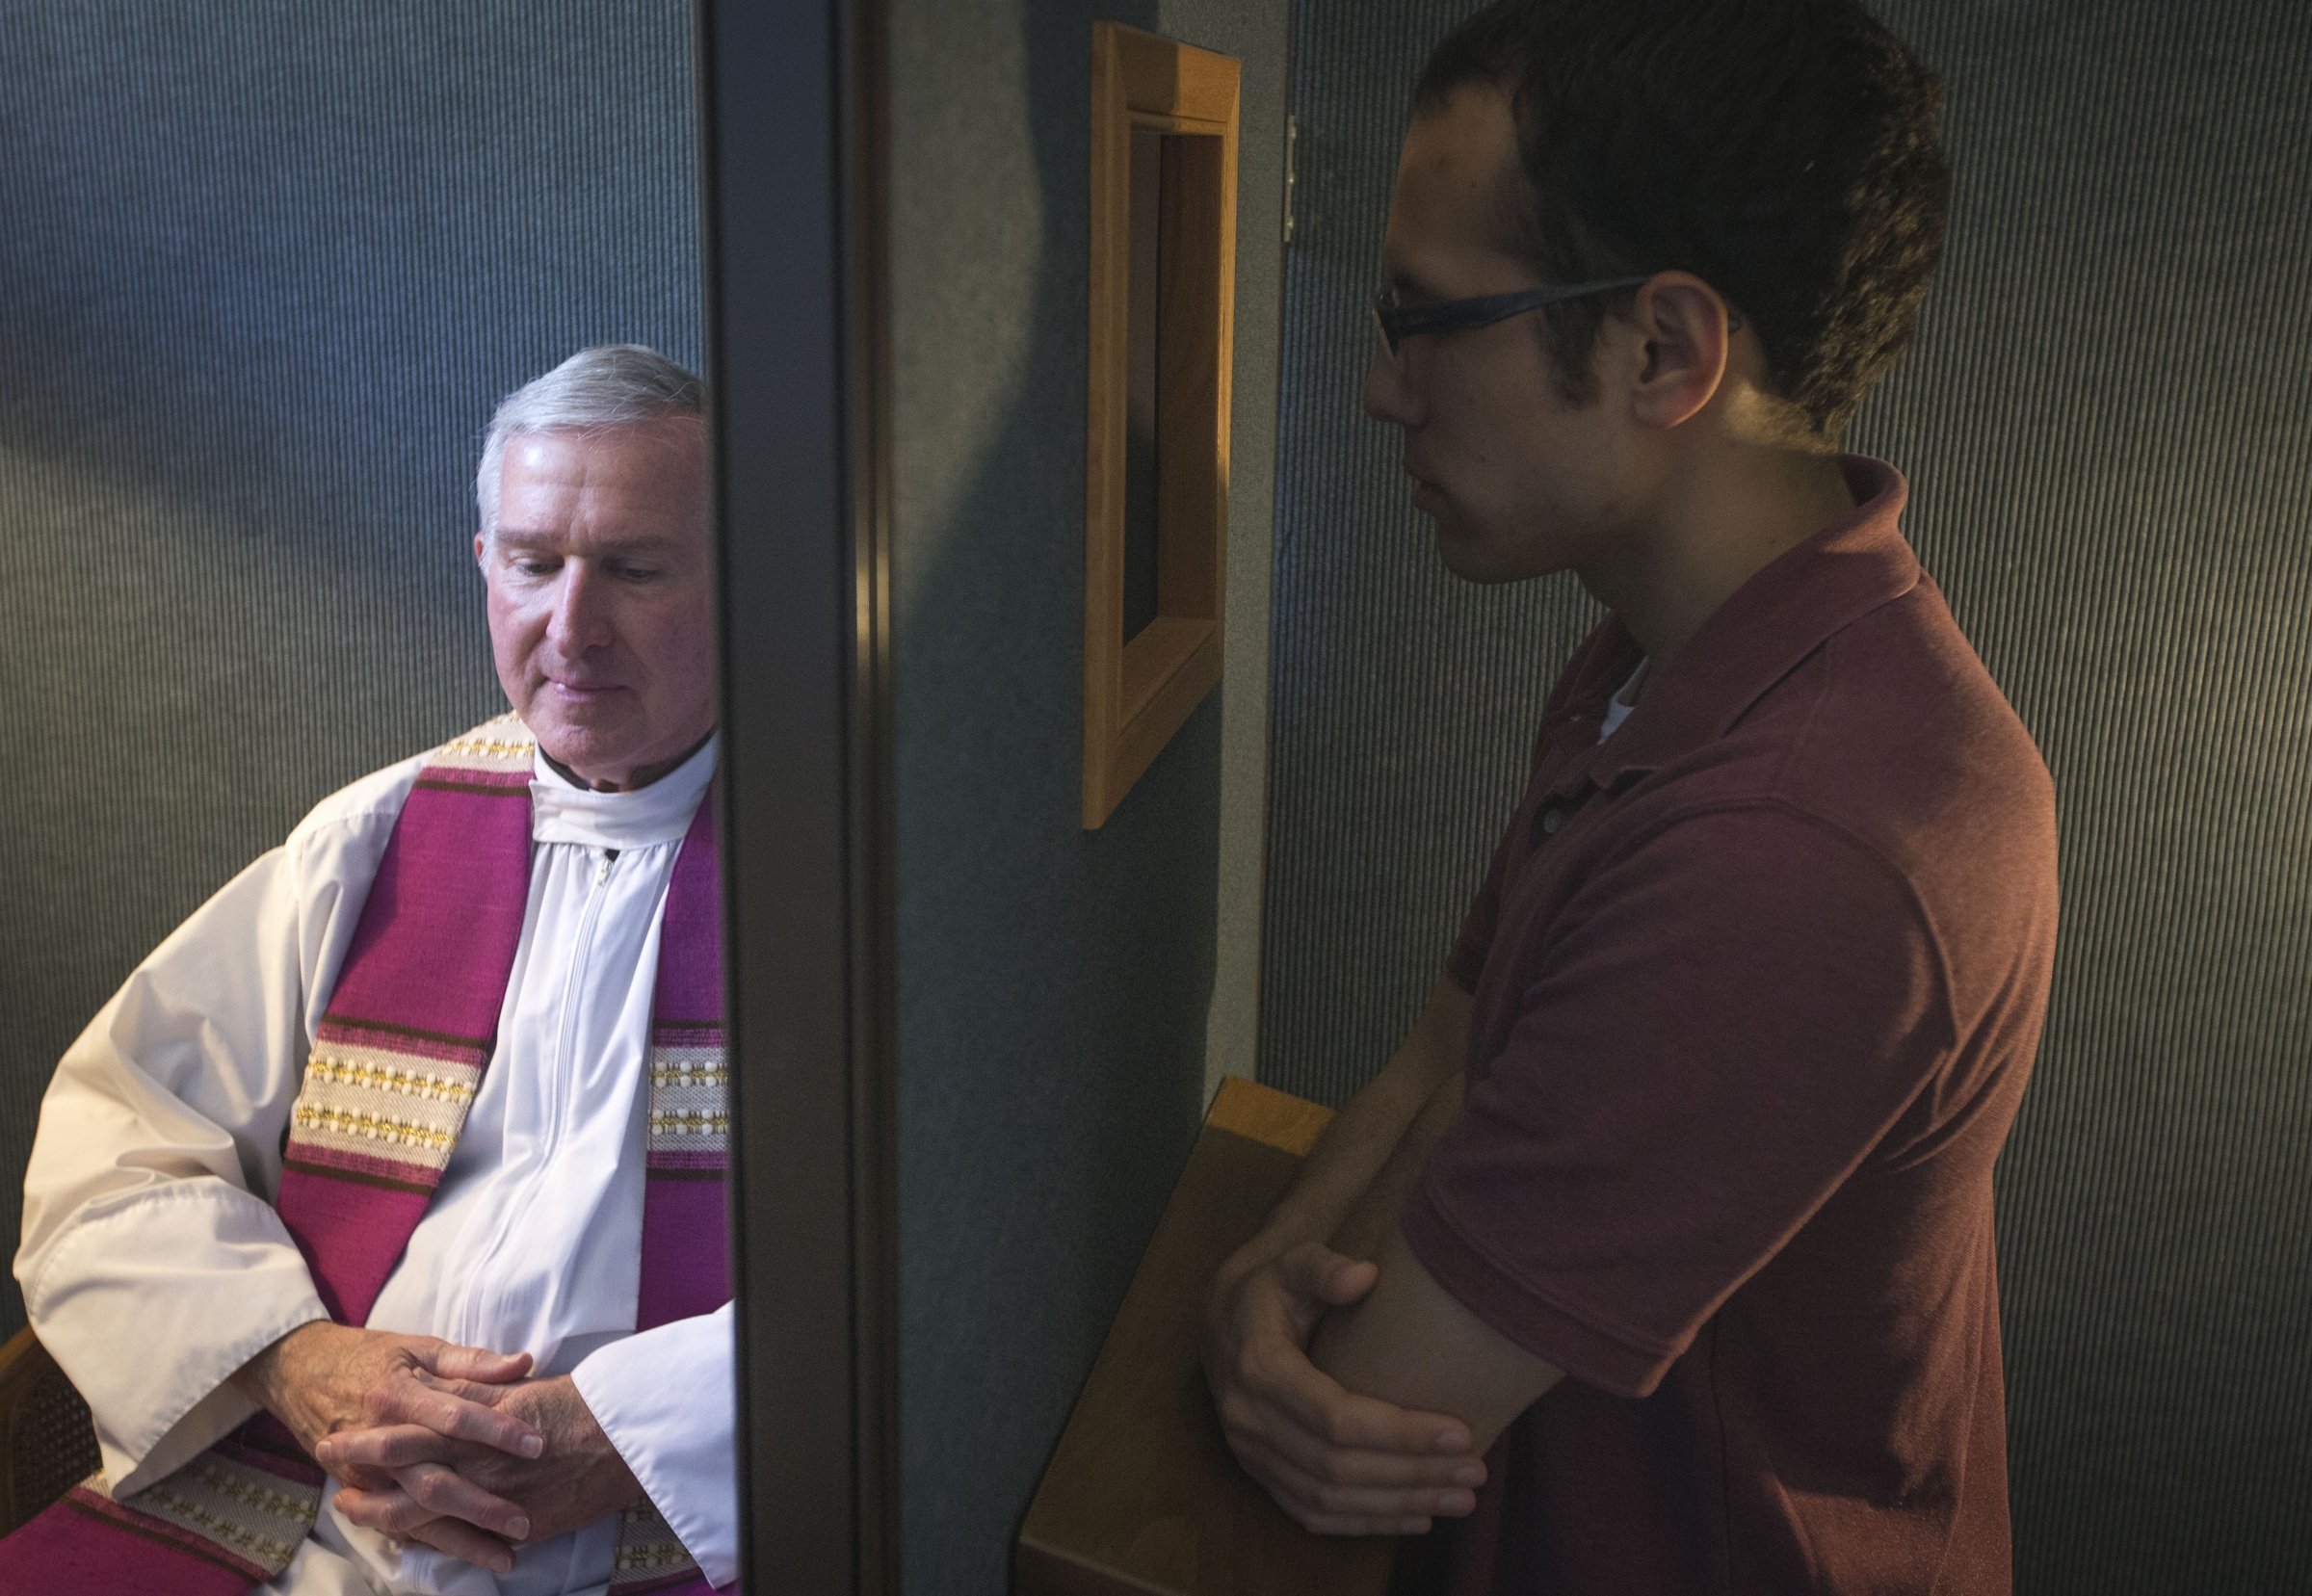 Fr. Timothy J. Mockaitis, pastor of Queen of Peace Church in Salem, Oregon, and penitent Ethan K. Alano of Salem demonstrate how a confession is conducted in this May 3, 2019, photo. (OSV News photo/CNS file, Chaz Muth)